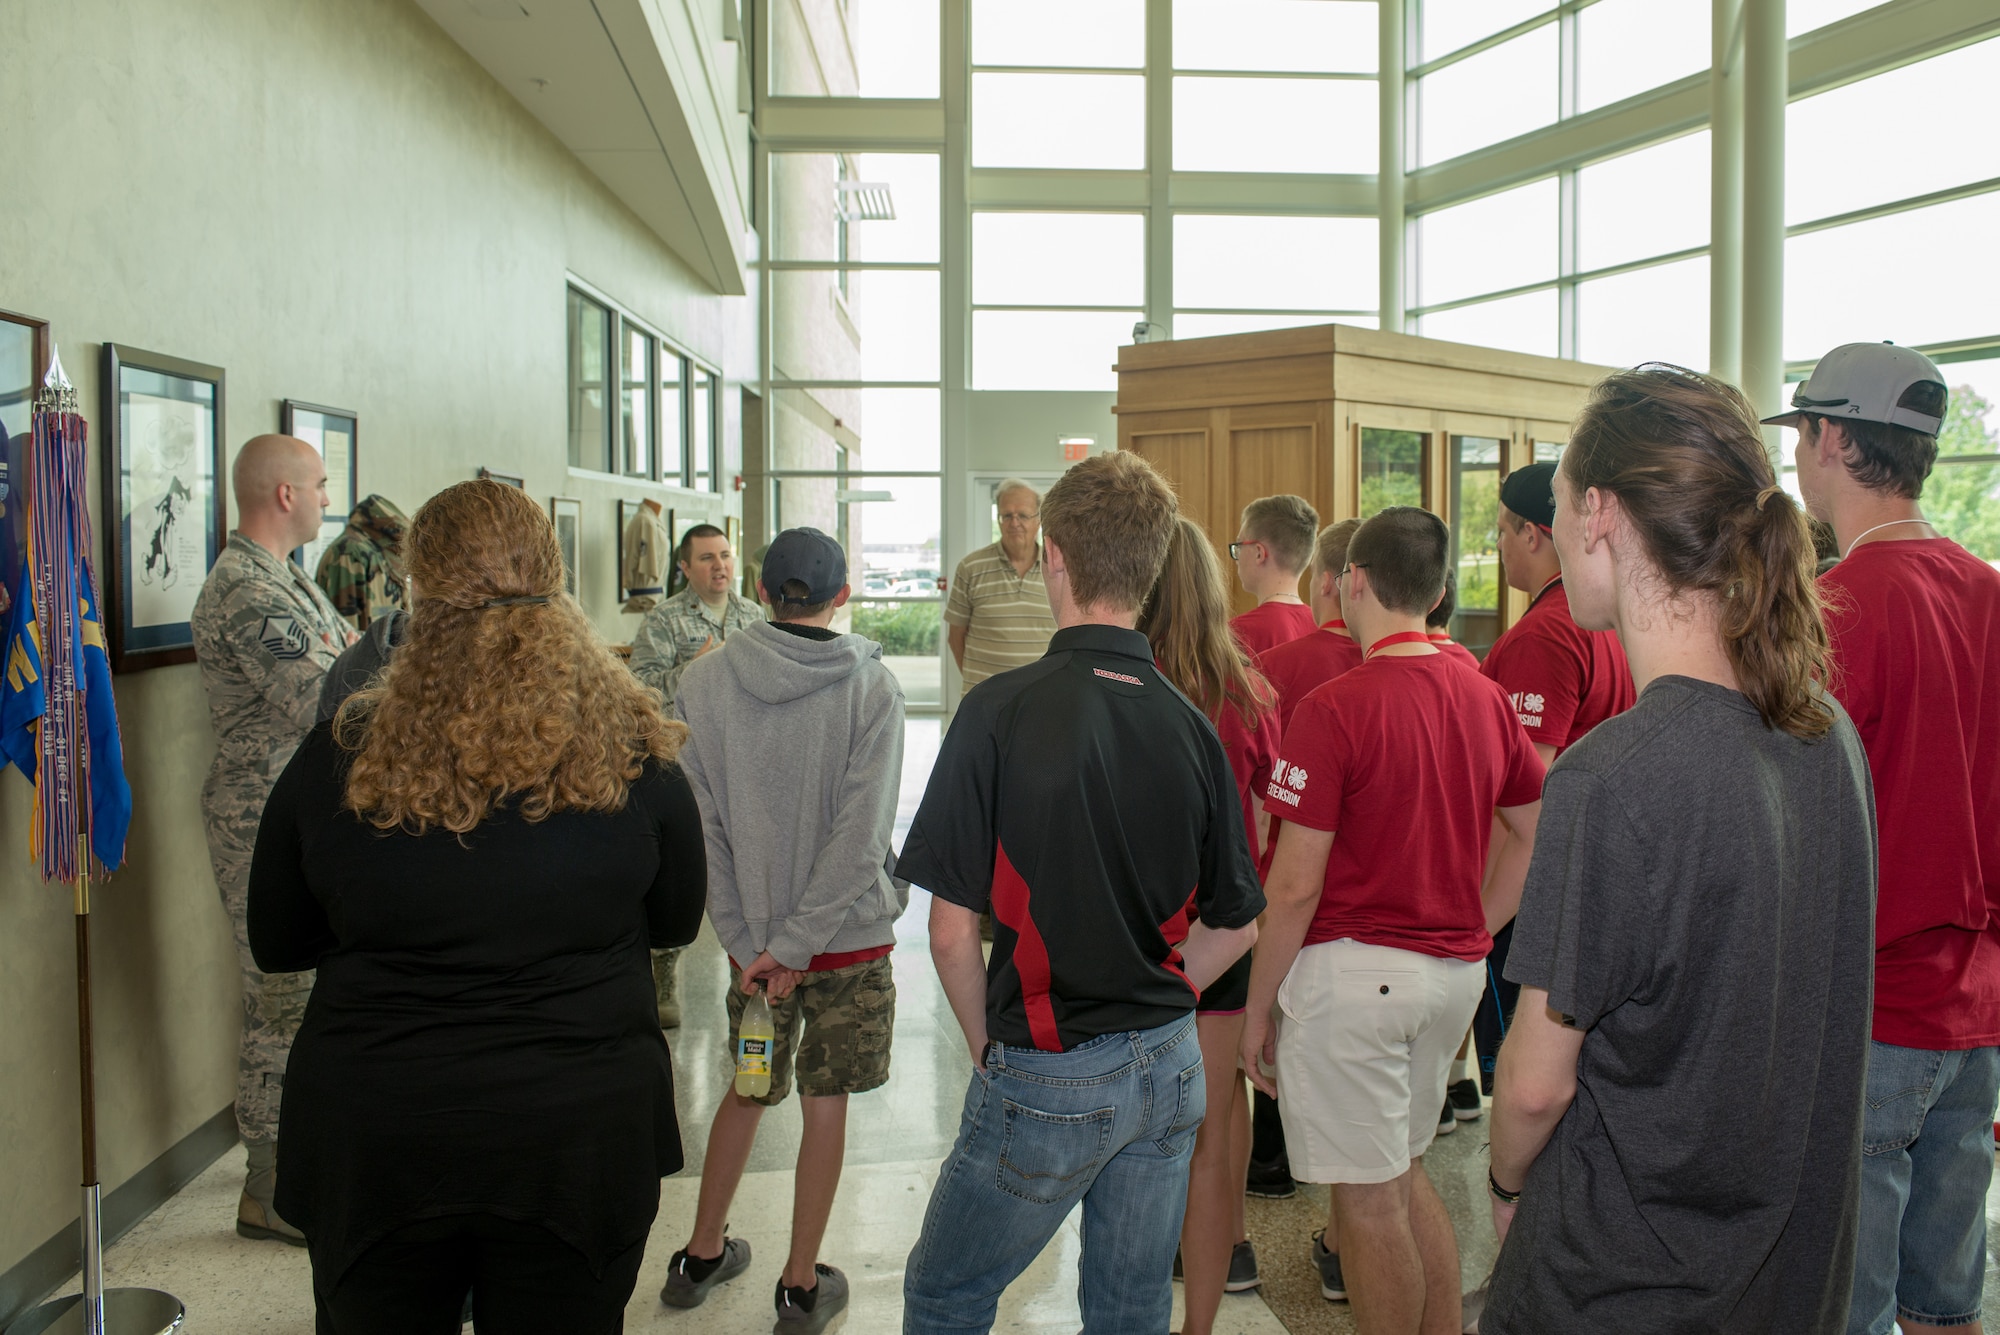 U.S. Air Force Maj. Brian Miller, 557th Weather Wing (WW) commander’s action group chief, describes opportunities in Air Force Weather to students from the University of Nebraska-Lincoln Weather Camp during a tour of the 557th WW June 12, 2018, Offutt Air Force Base, Nebraska. Students also viewed the wing’s historical artifacts before touring the wing’s Space Weather Operations Center and High Performance Computer Center. (U.S. Air Force photo by Paul Shirk)